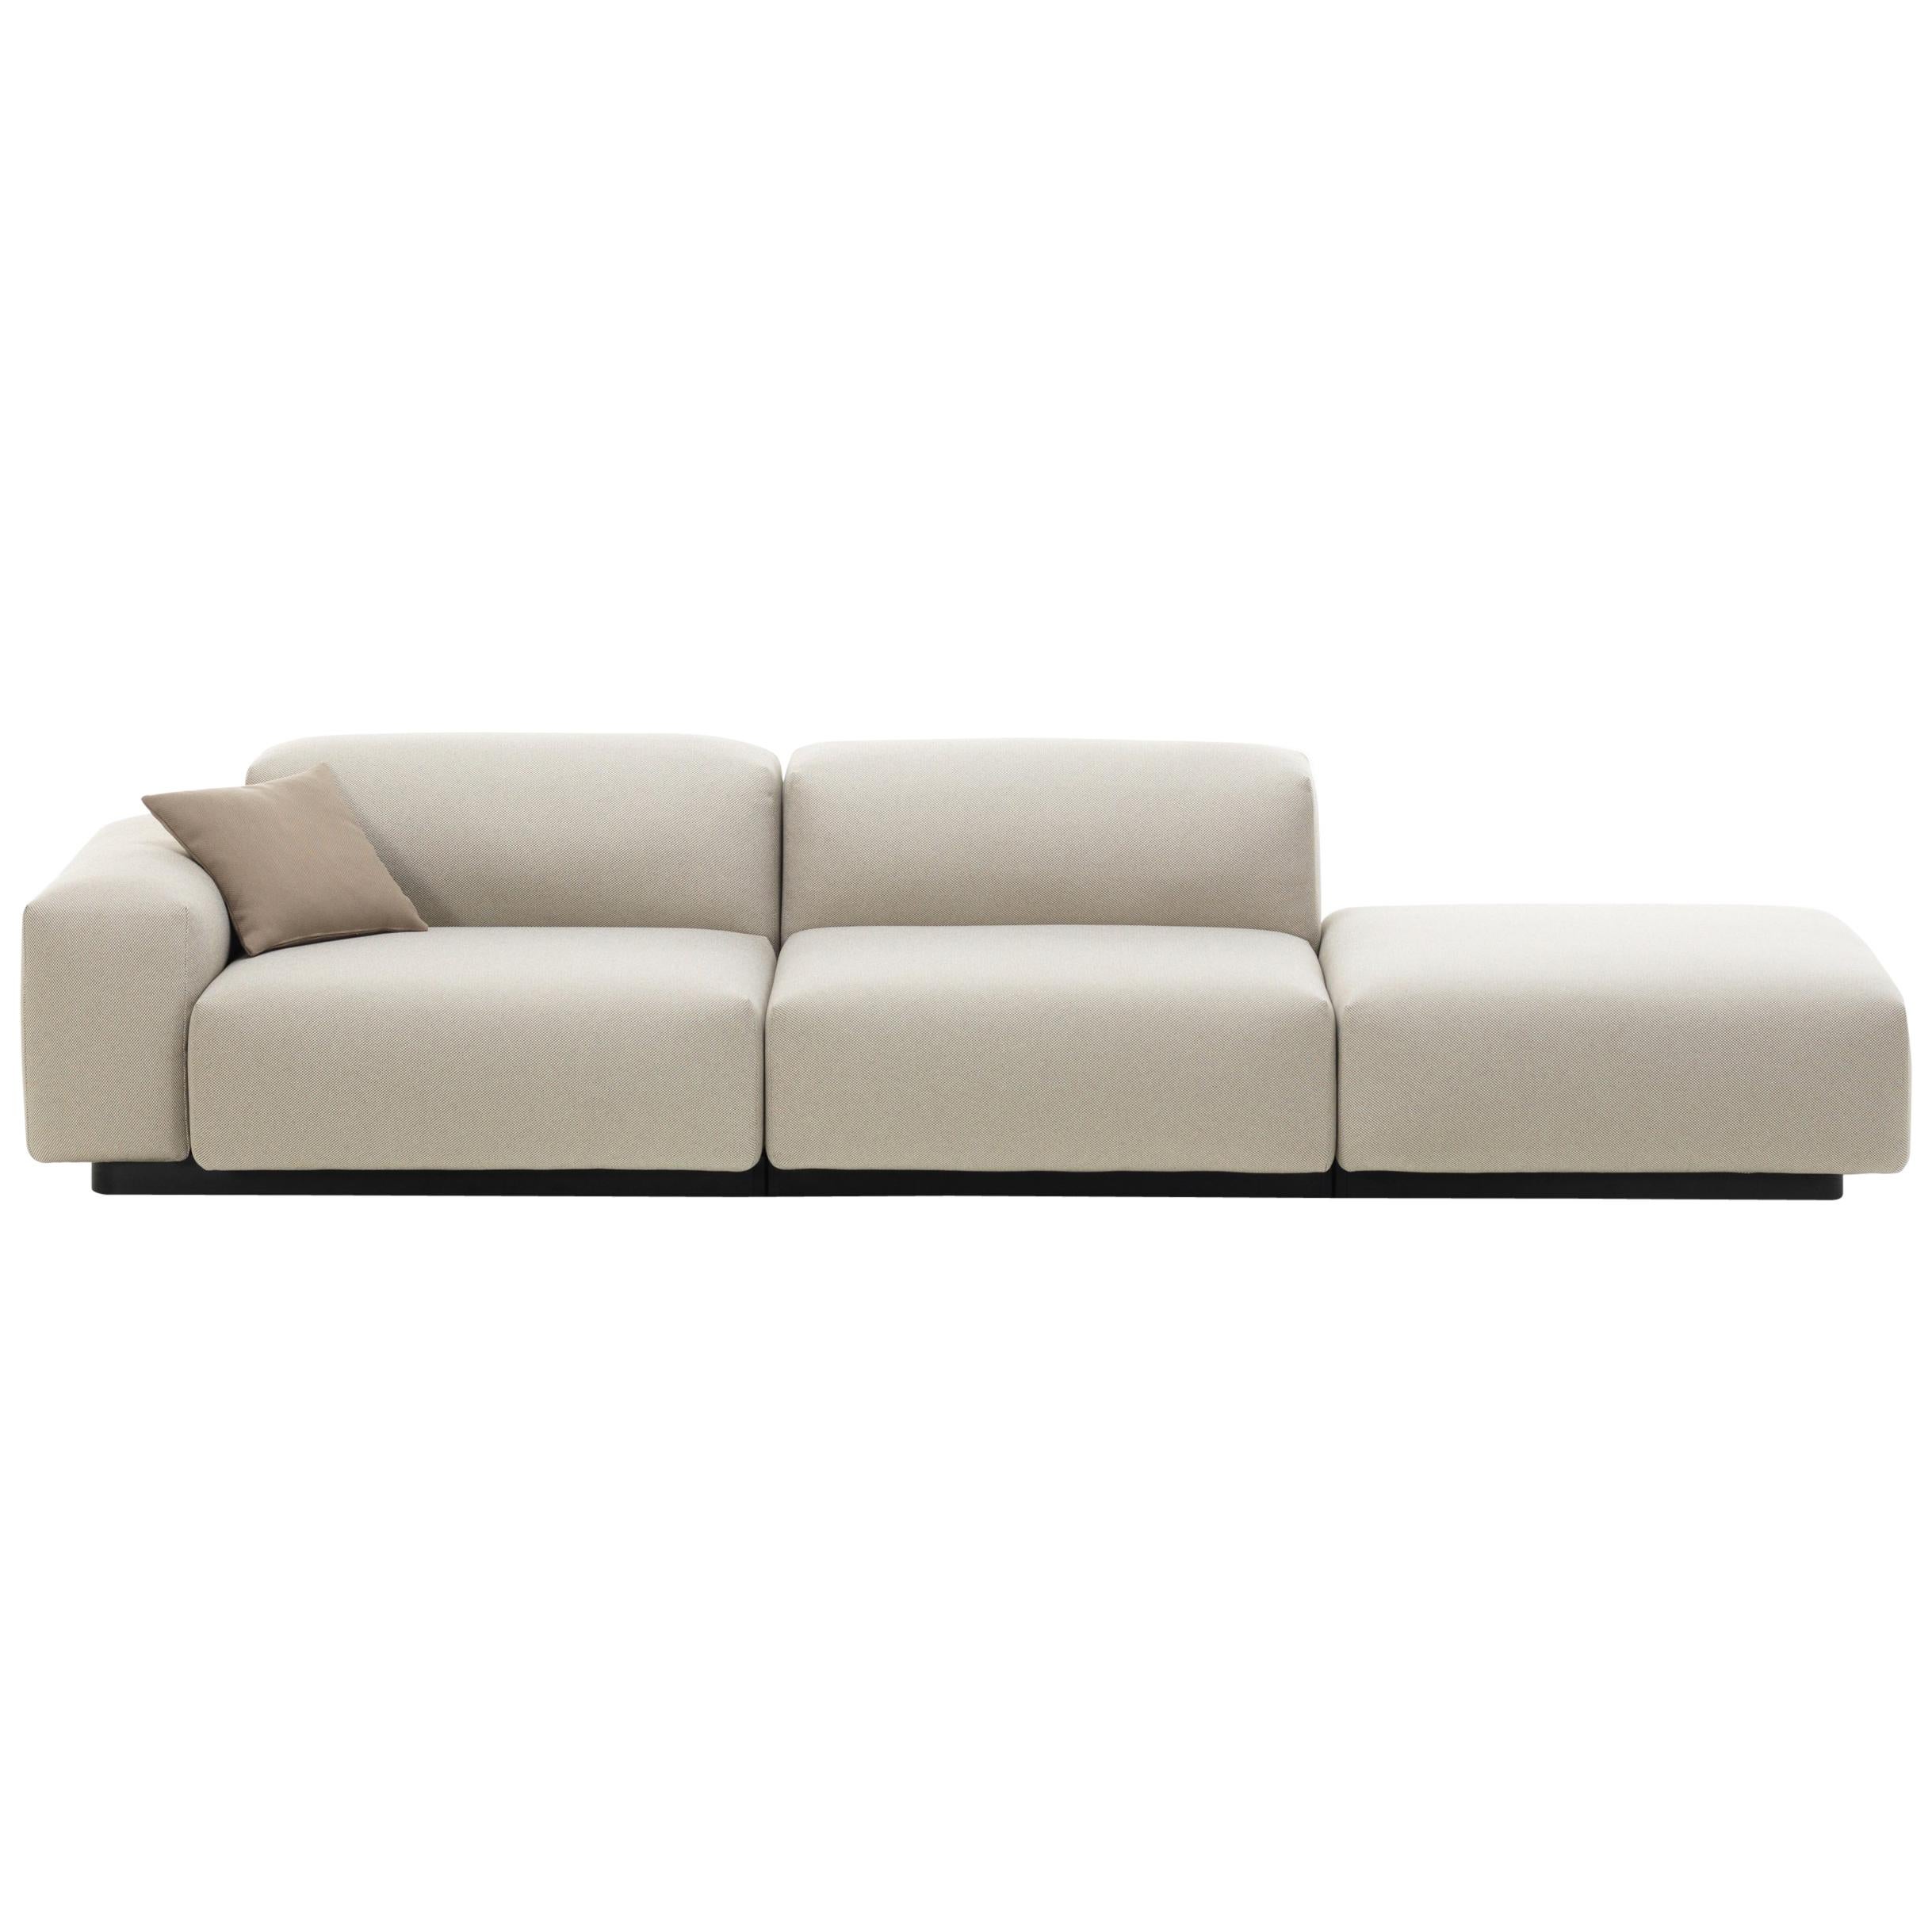 Vitra Soft Modular Three-Seat Sofa with Platform Right in Pearl Olimpo For Sale